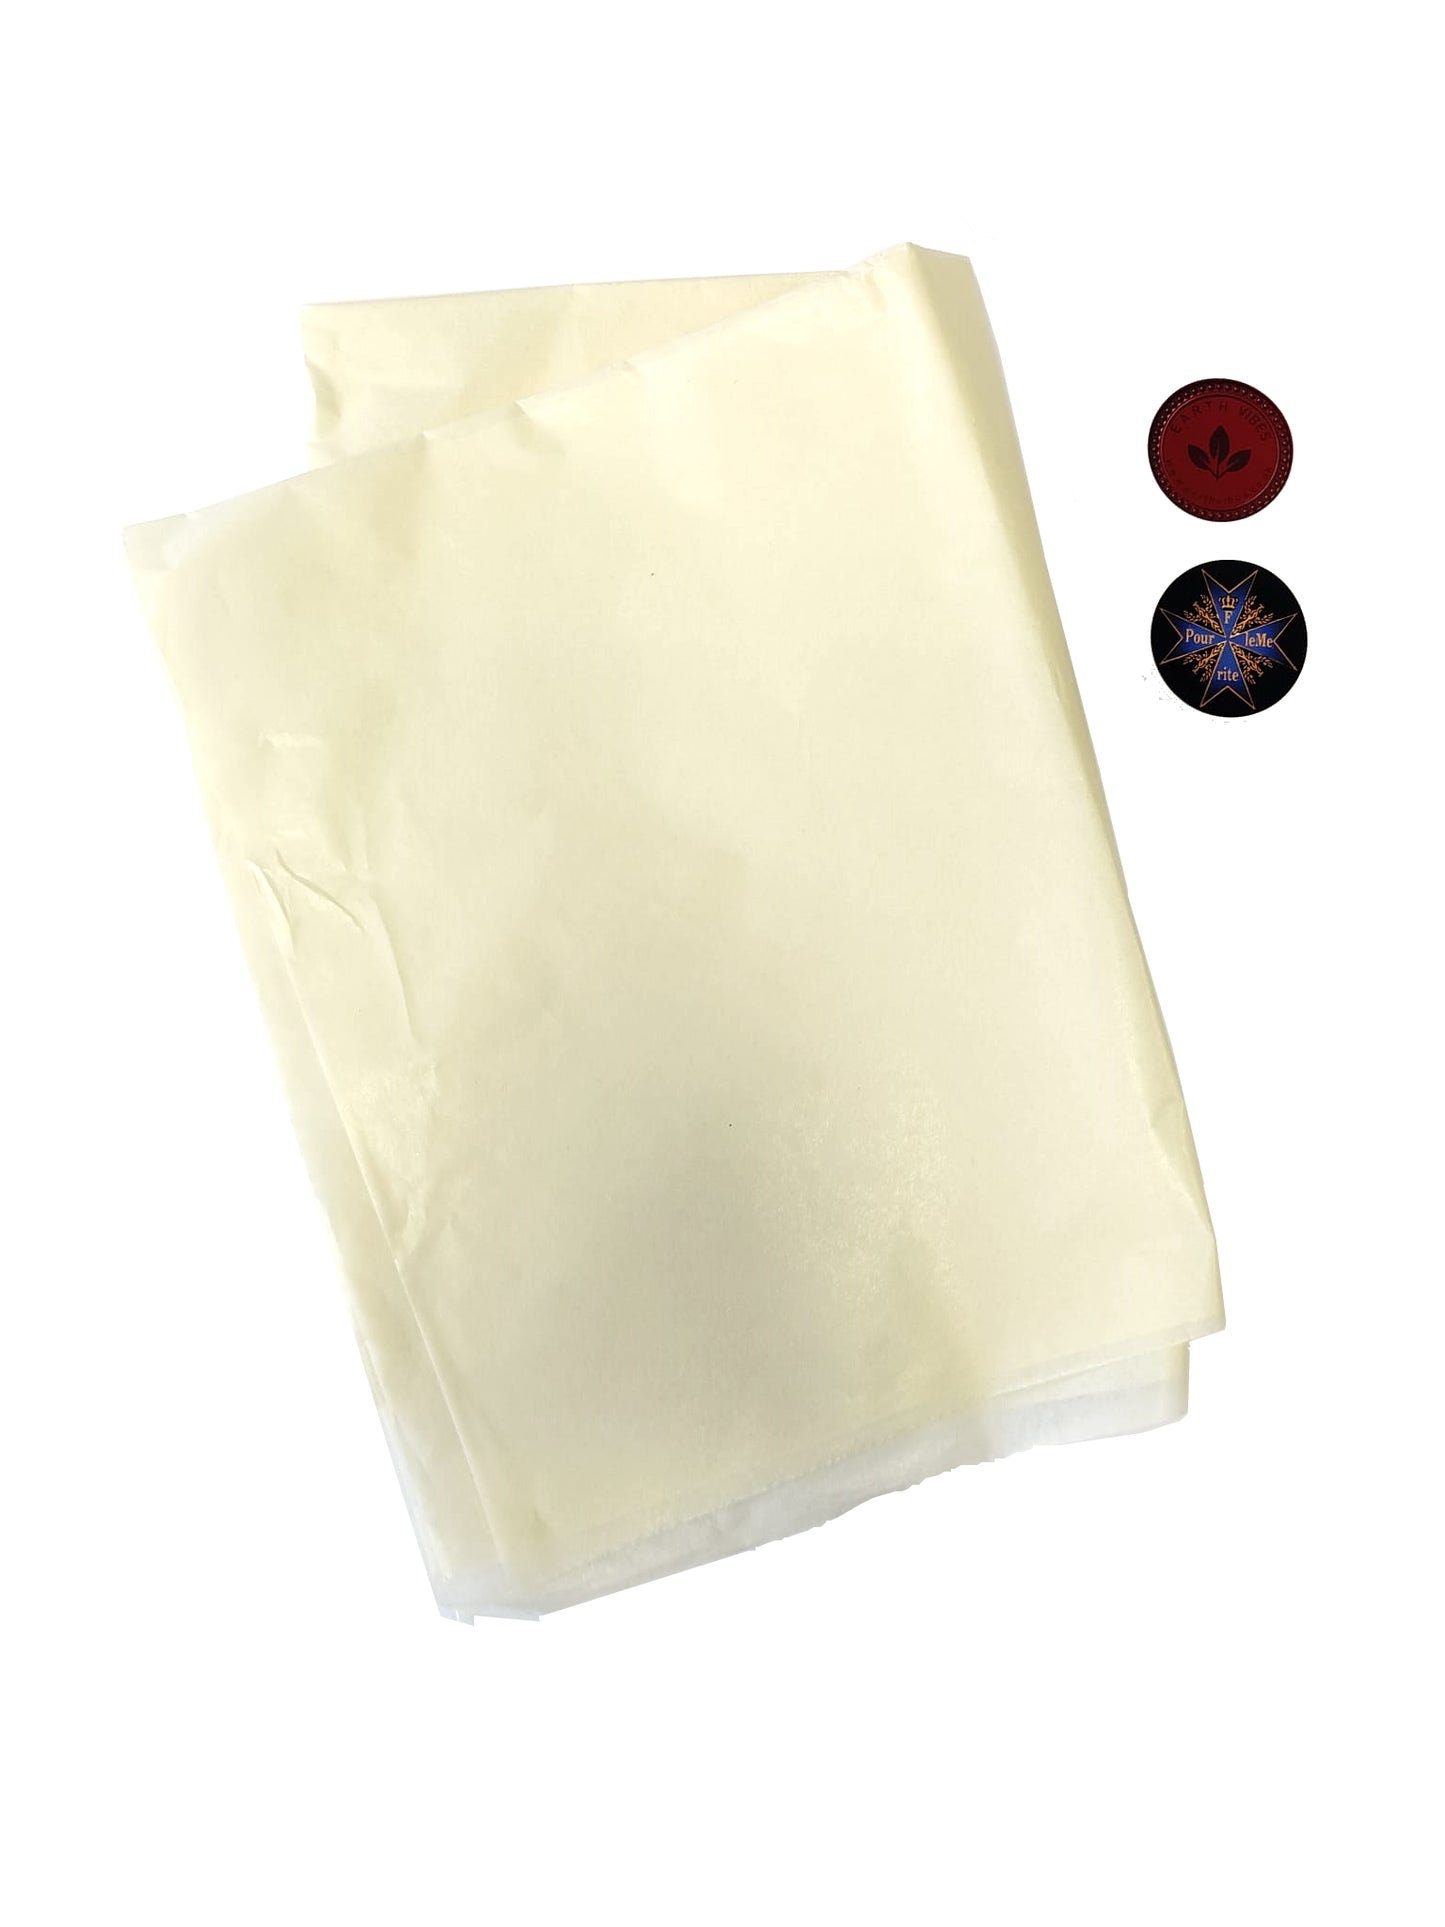 Hensons Standard none dope Free Flight Tissue Covering - 3 pack